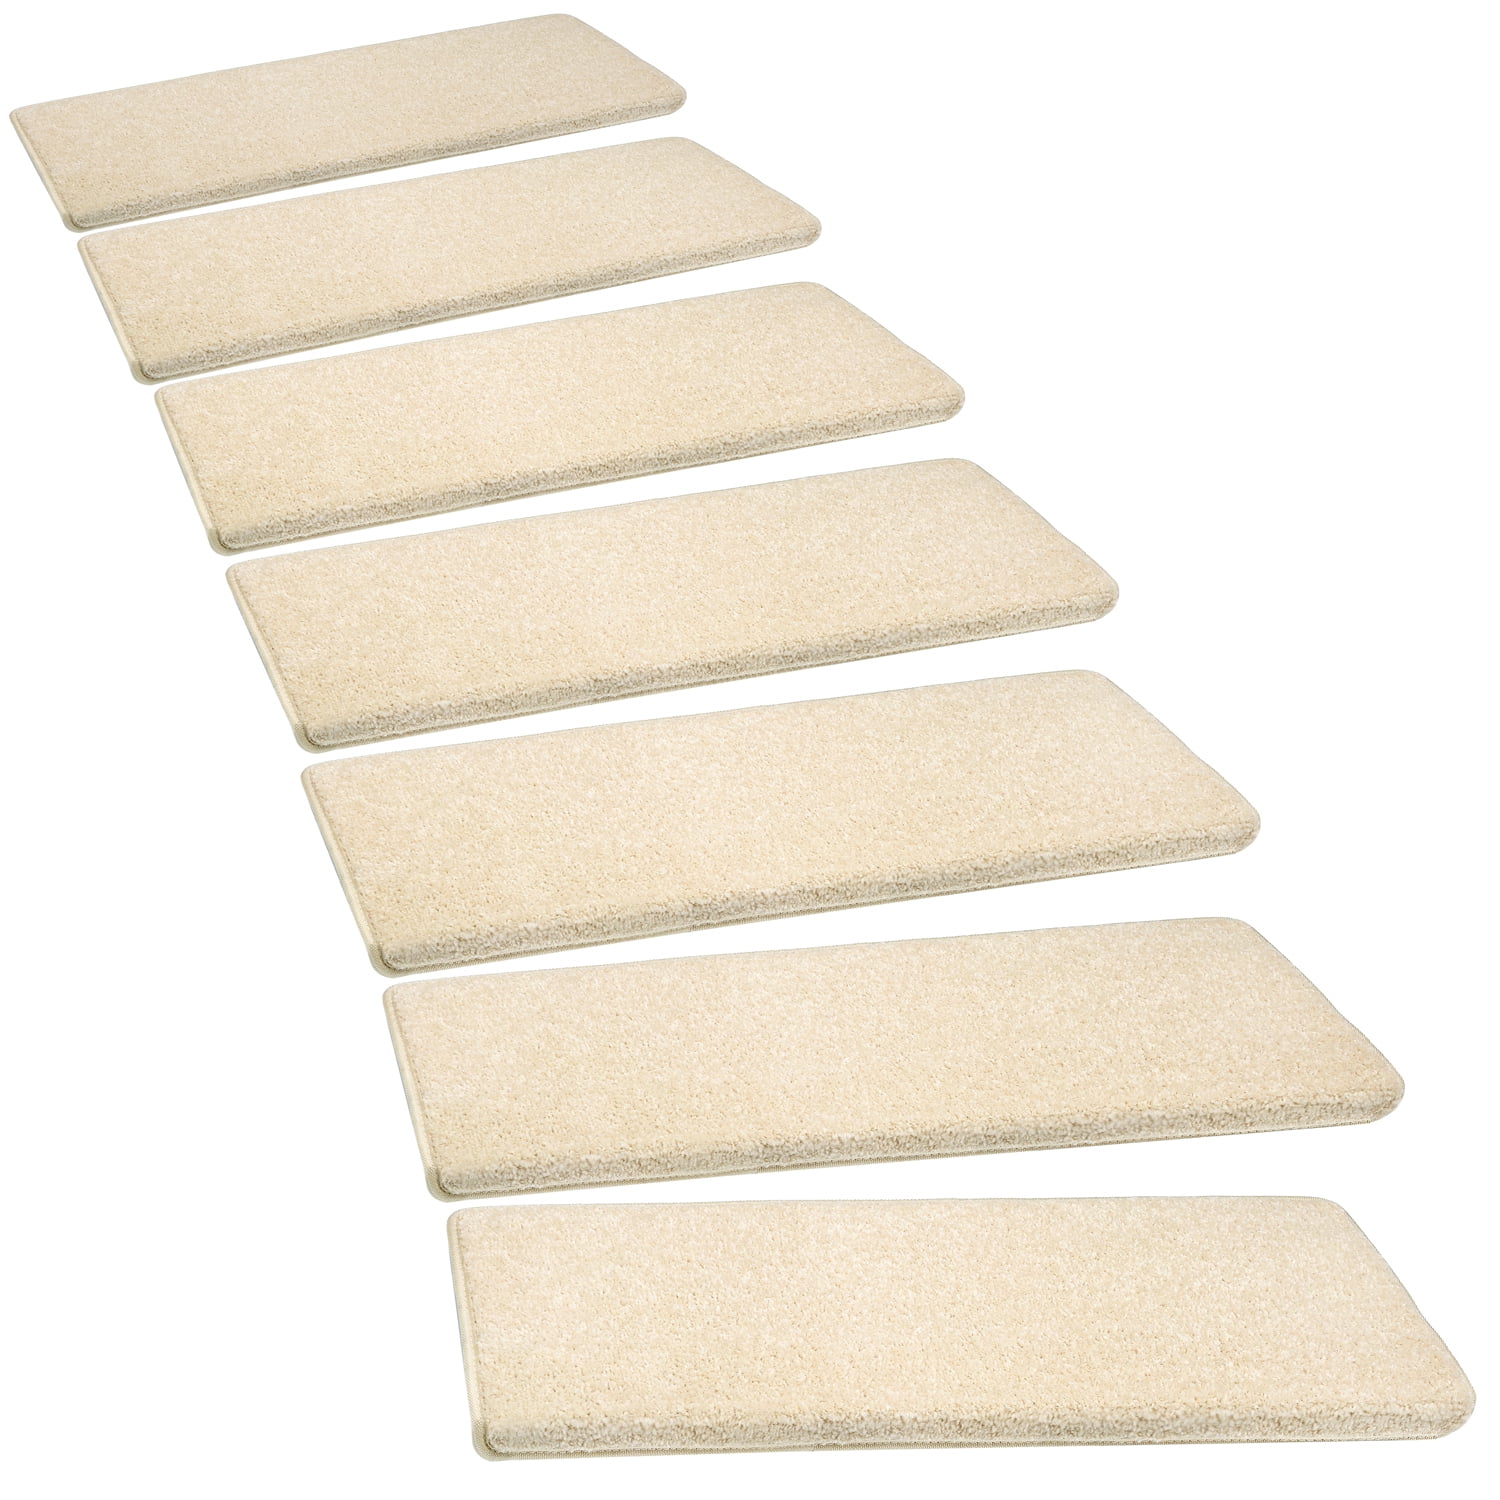 PURE ERA Carpet Stair Treads Set of 14 Non-Slip Self Adhesive Bullnose Indoor Stair Protectors Pet Friendly Rugs Covers Mats Skid Resistant Tape Free Soft Washable Grey 9.5 x 30x1.2 